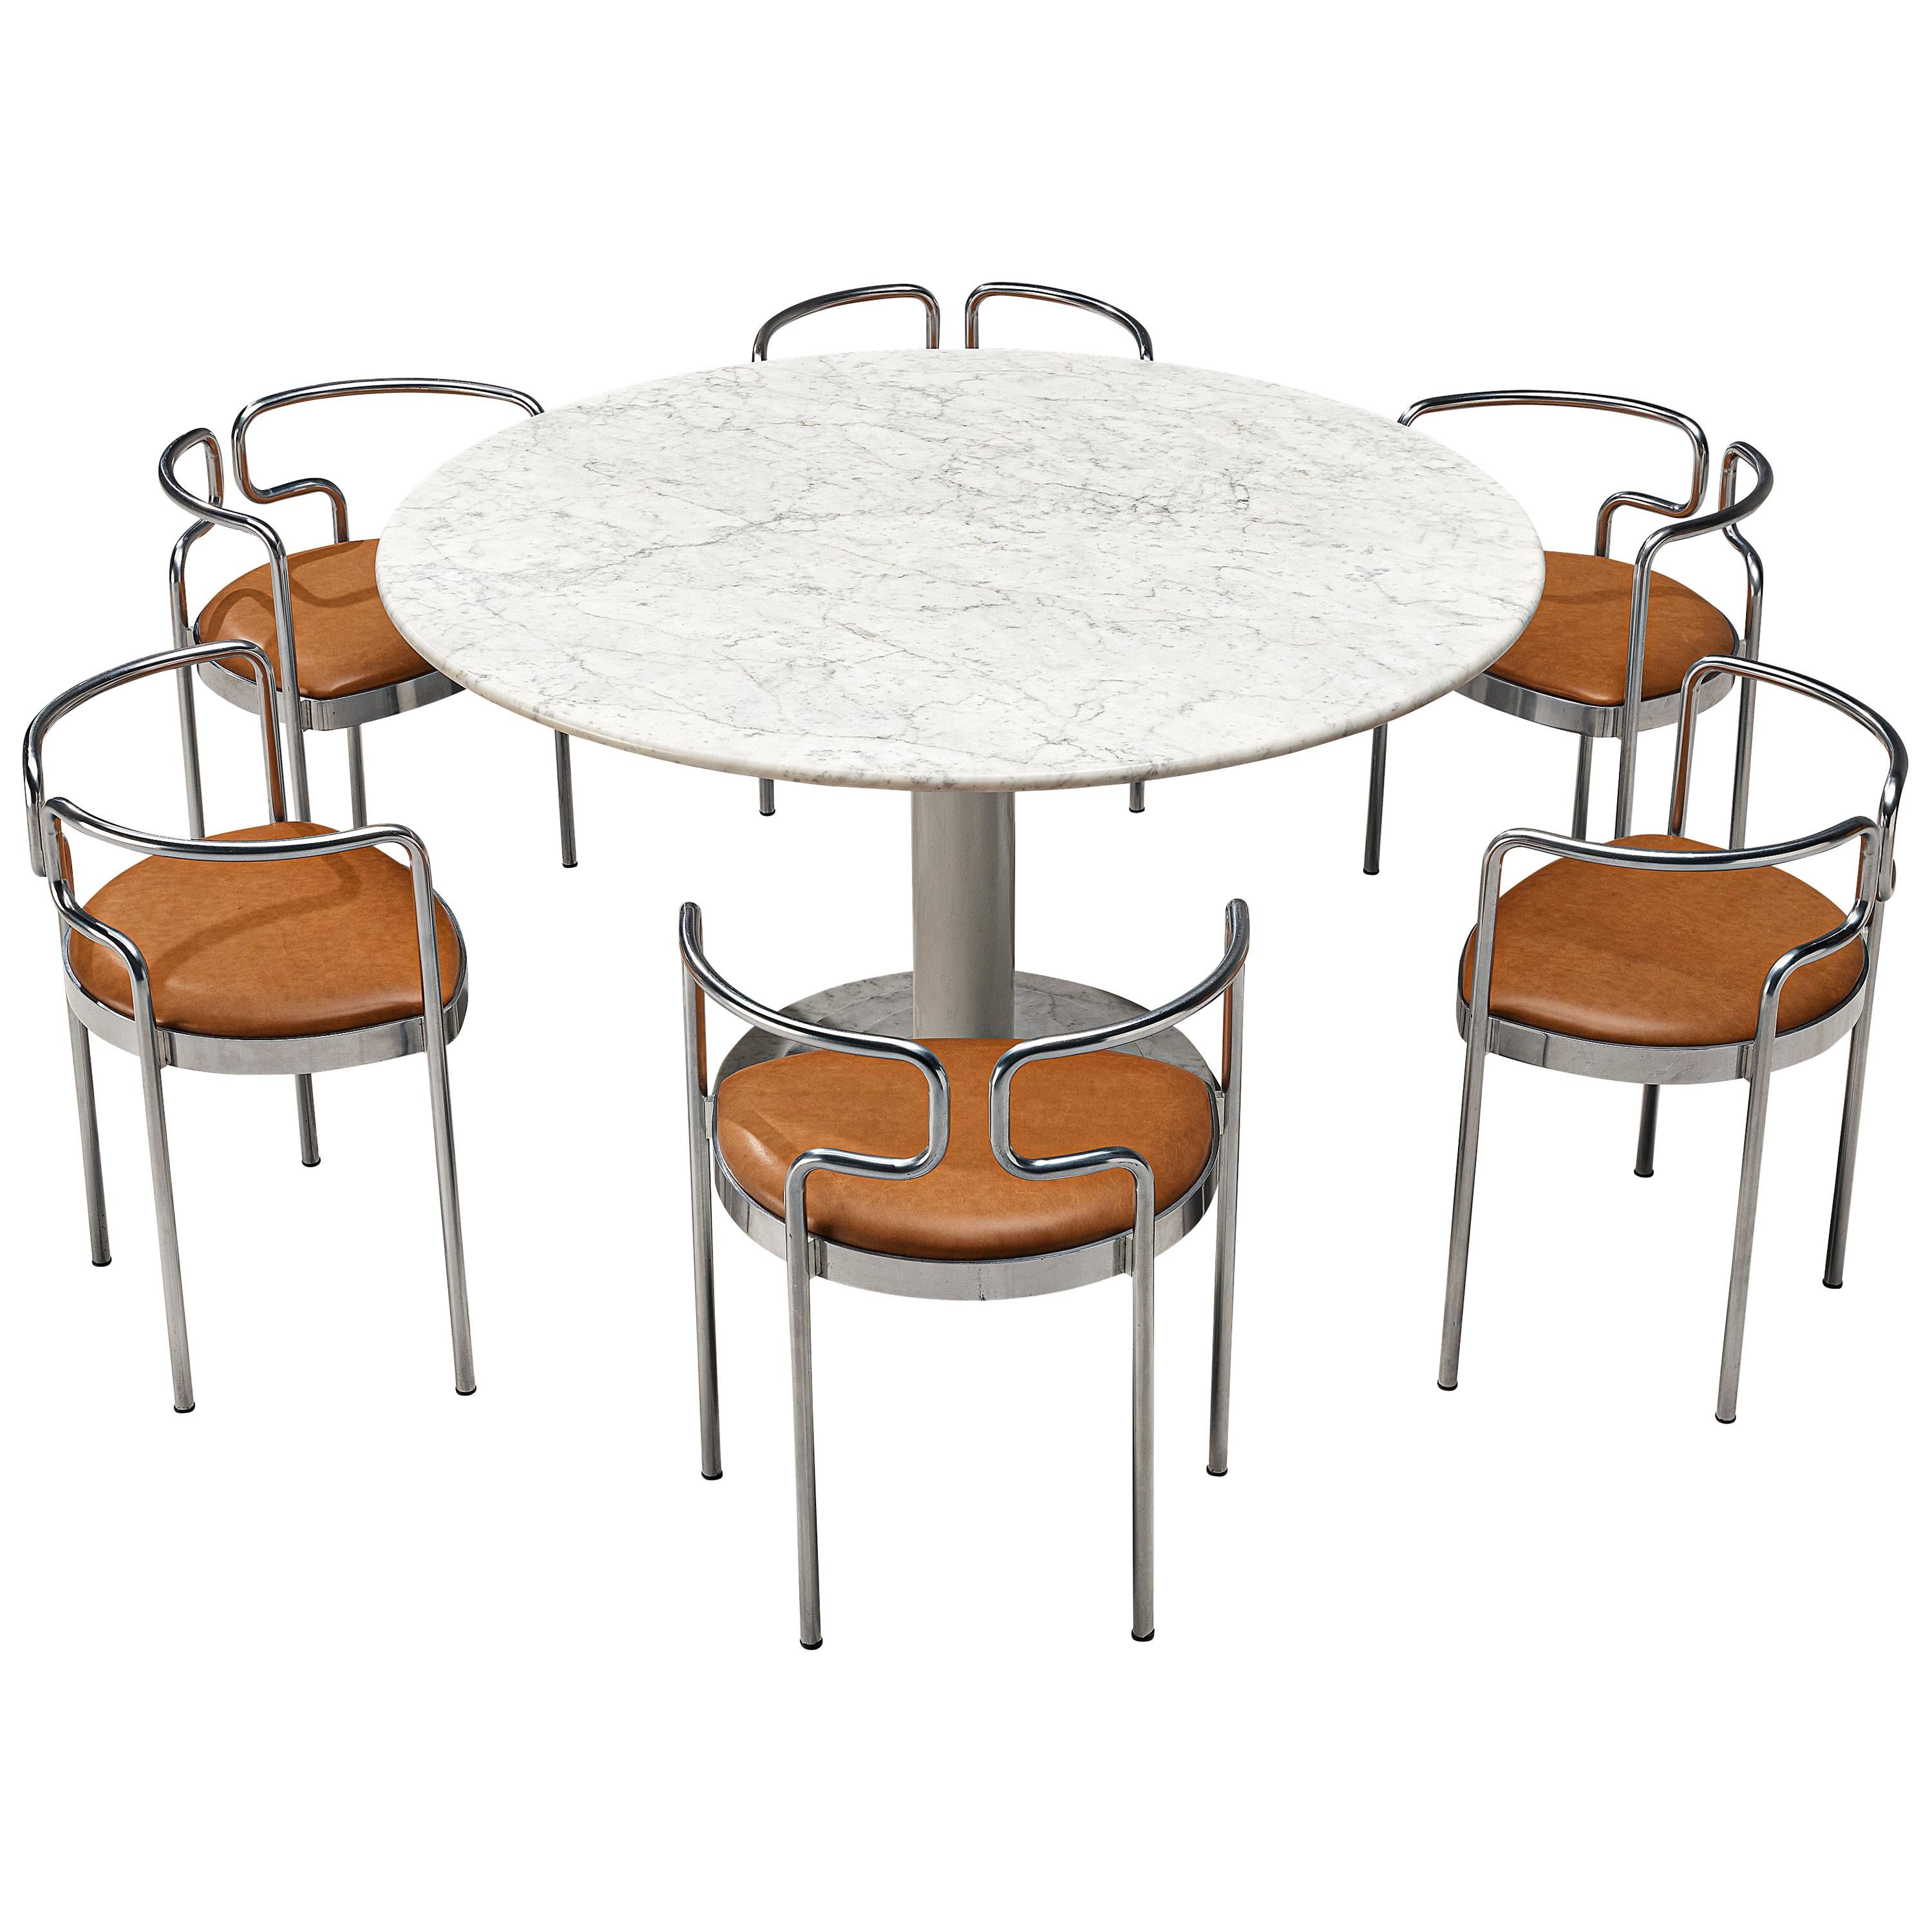 Marble Dining Table with Henning Larsen Dining Chairs 9230 in Cognac Leather